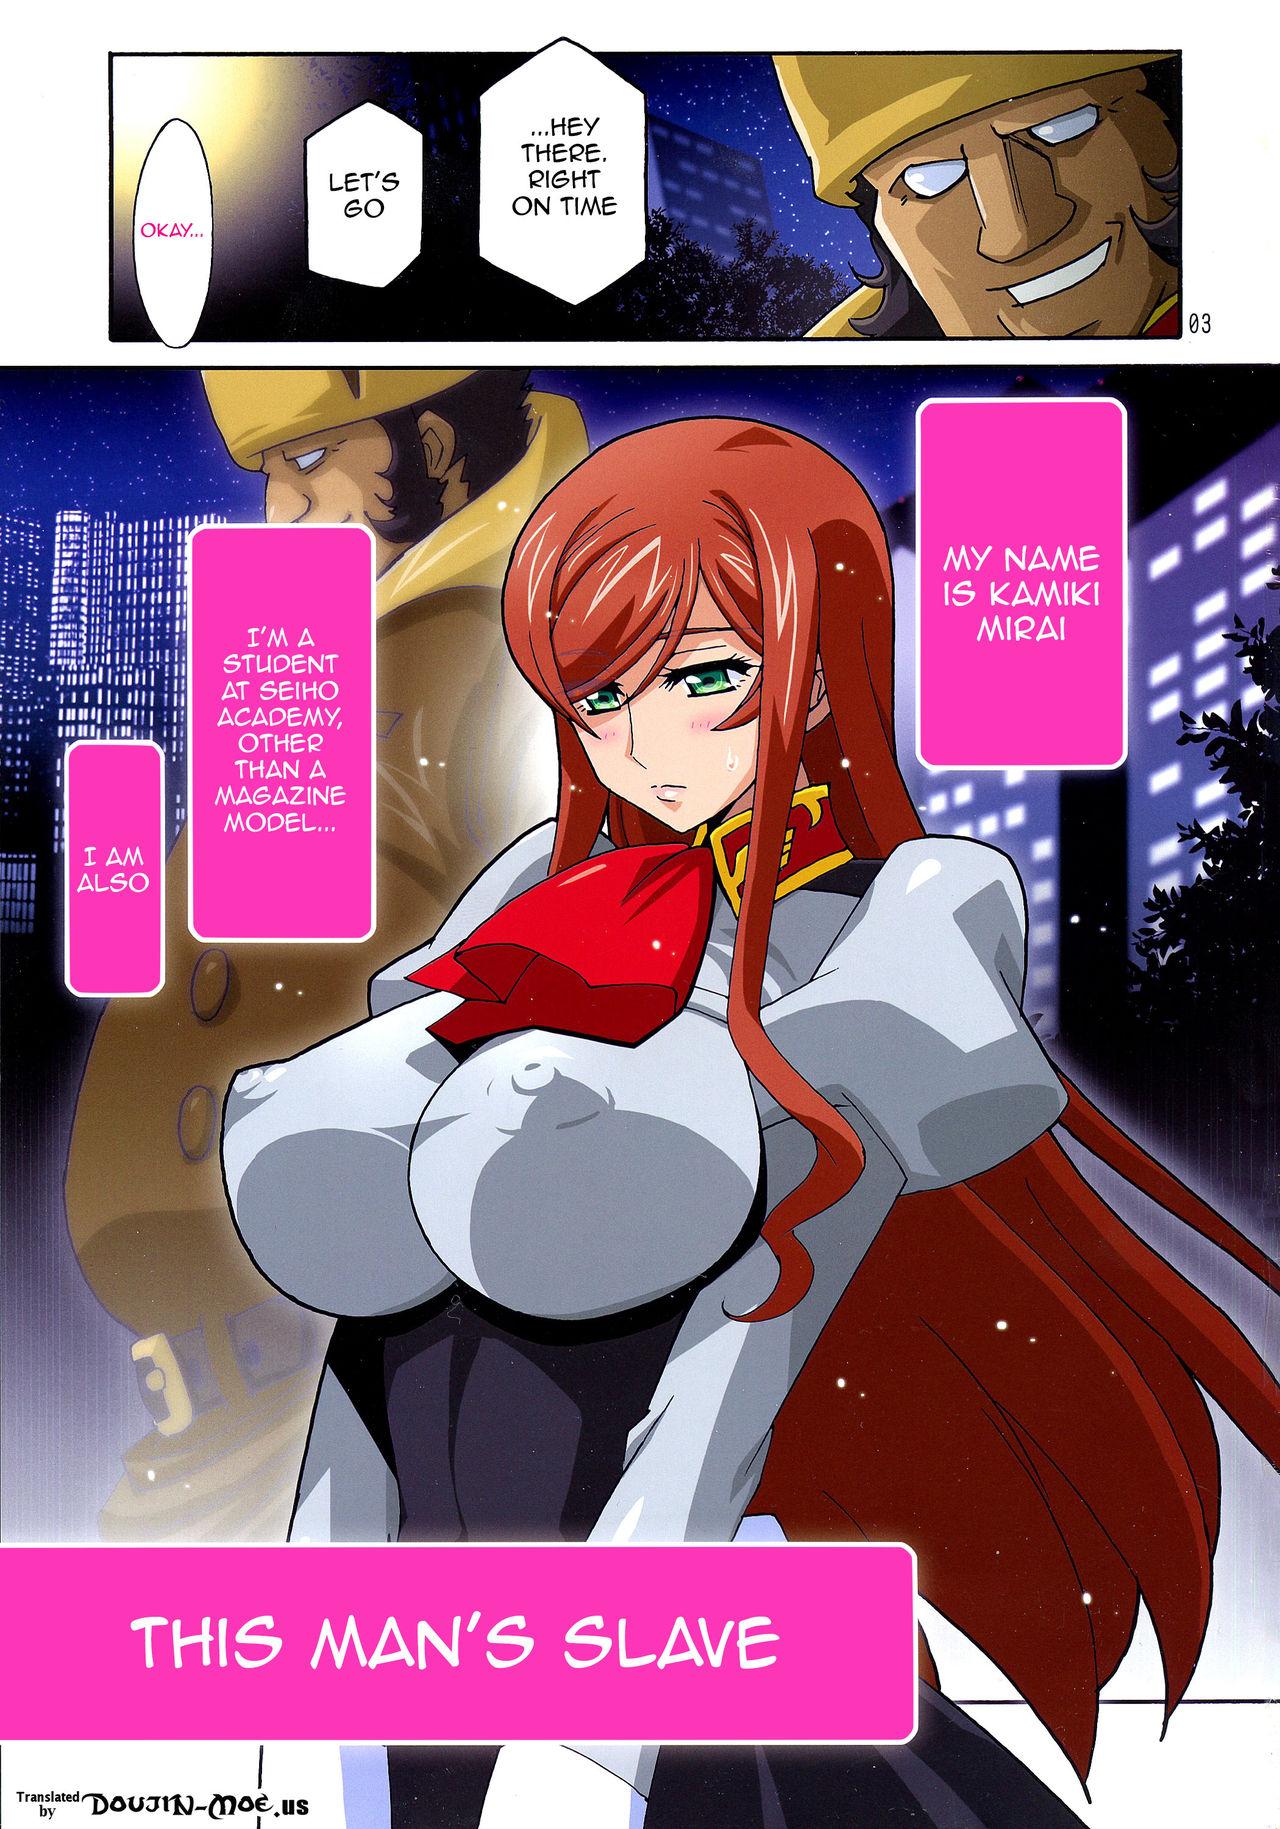 Missionary Porn Mirai Nikki - Gundam build fighters try Hot Couple Sex - Page 2